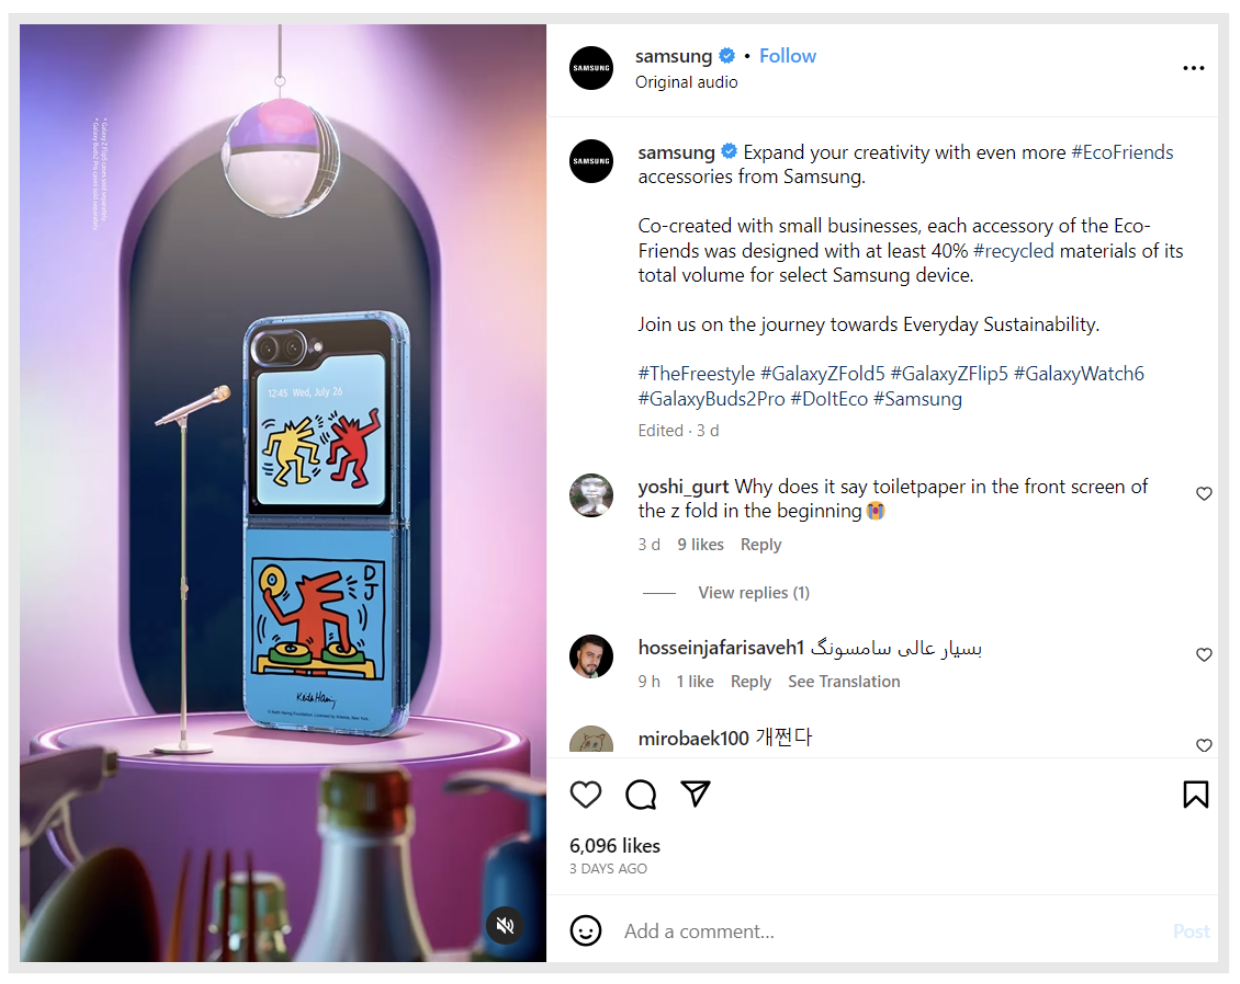 An Instagram post by Samsung promoting its Eco-Friends line of accessories